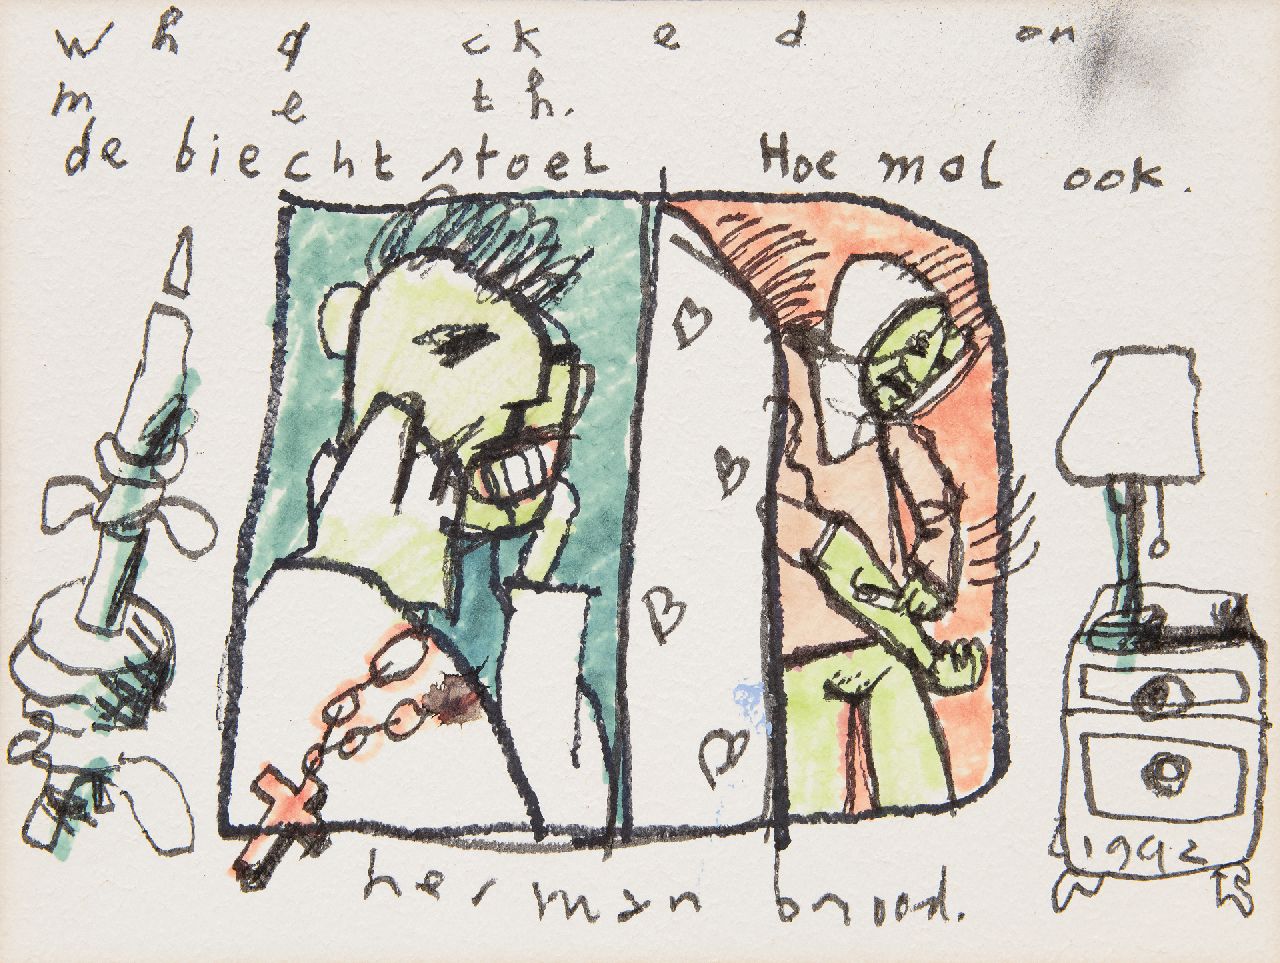 Brood H.  | Herman Brood | Watercolours and drawings offered for sale | The confessional, felt-tip pen on paper 29.0 x 38.8 cm, signed l.c. and dated 1992